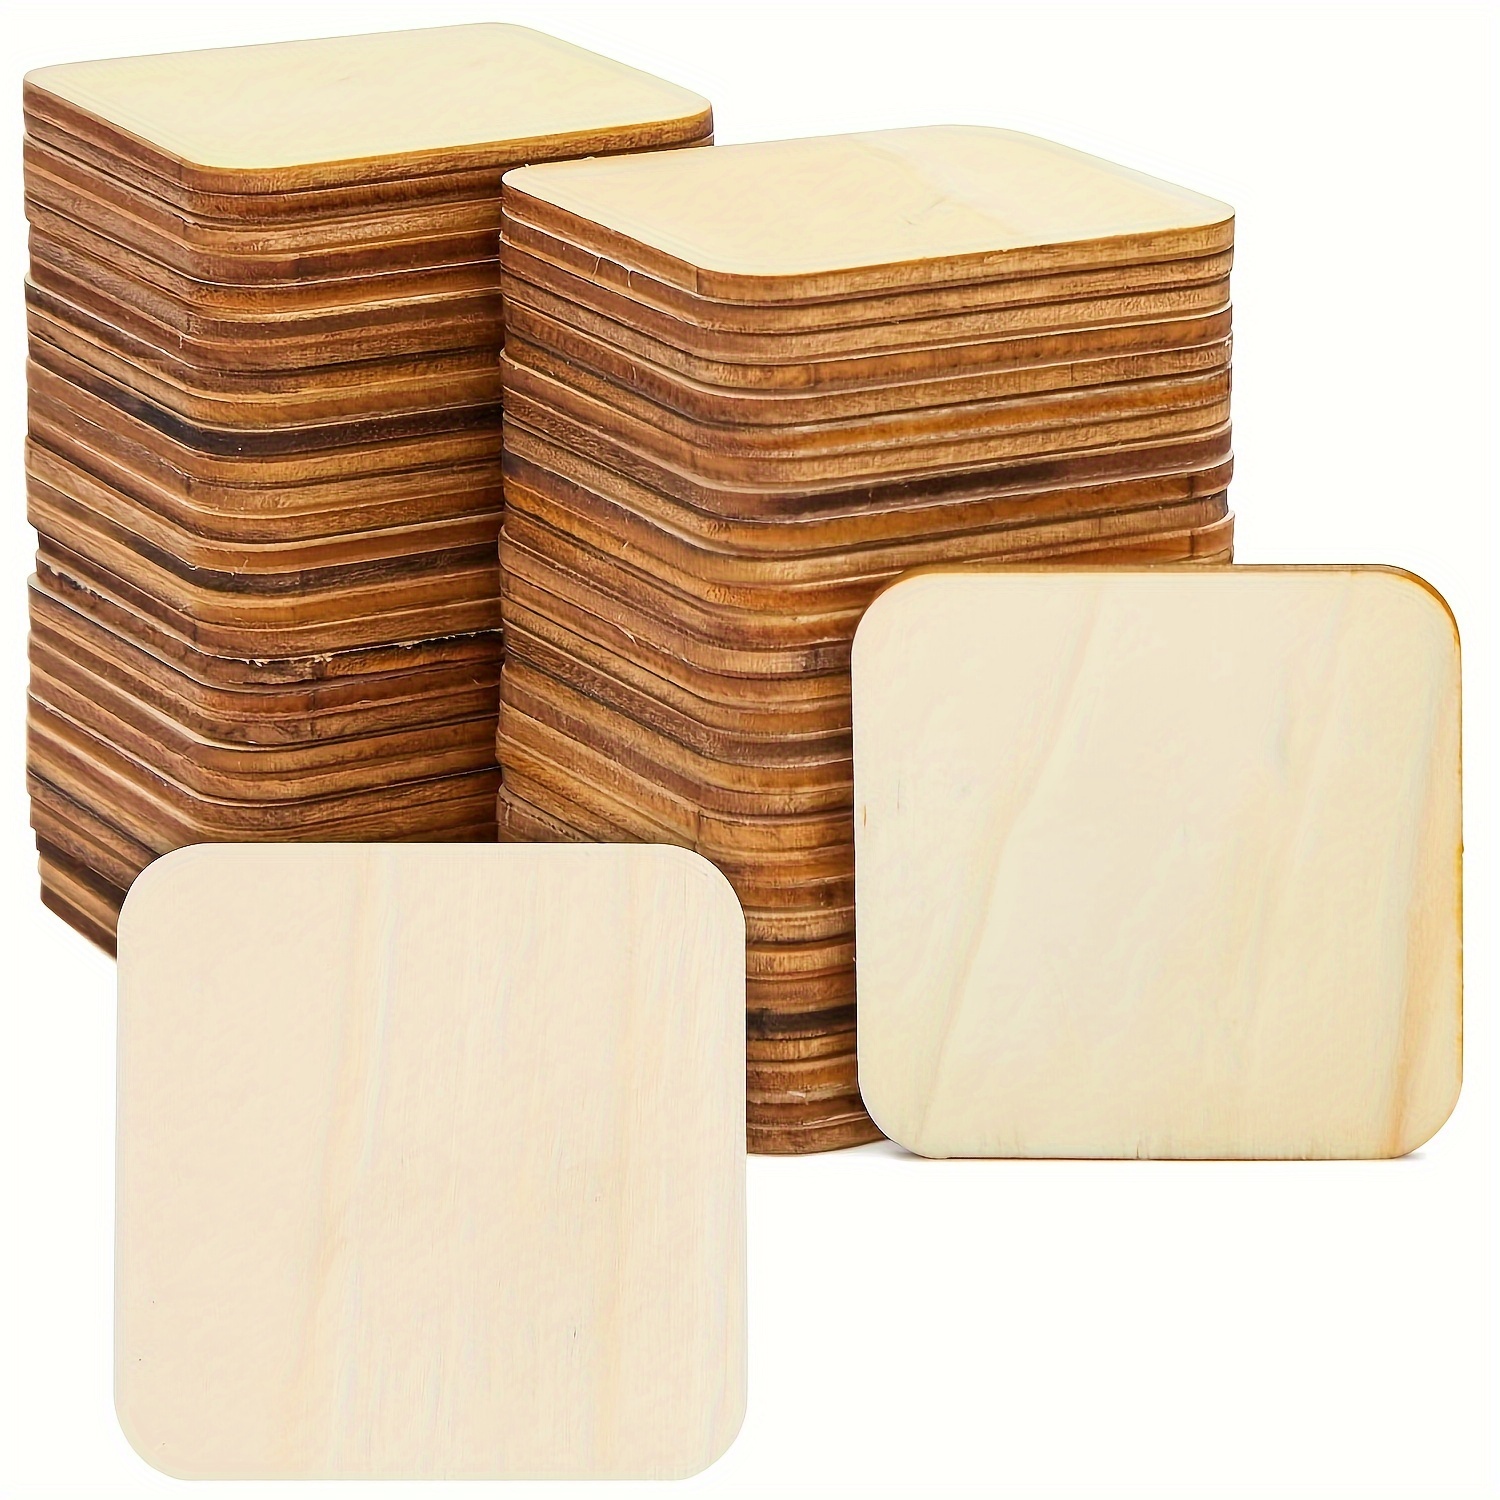 

50pcs 5cm/2in Wooden Squares For Diy Crafts, Wooden Tiles For Painting Wood Carving Round Corners Blank Wood Chips